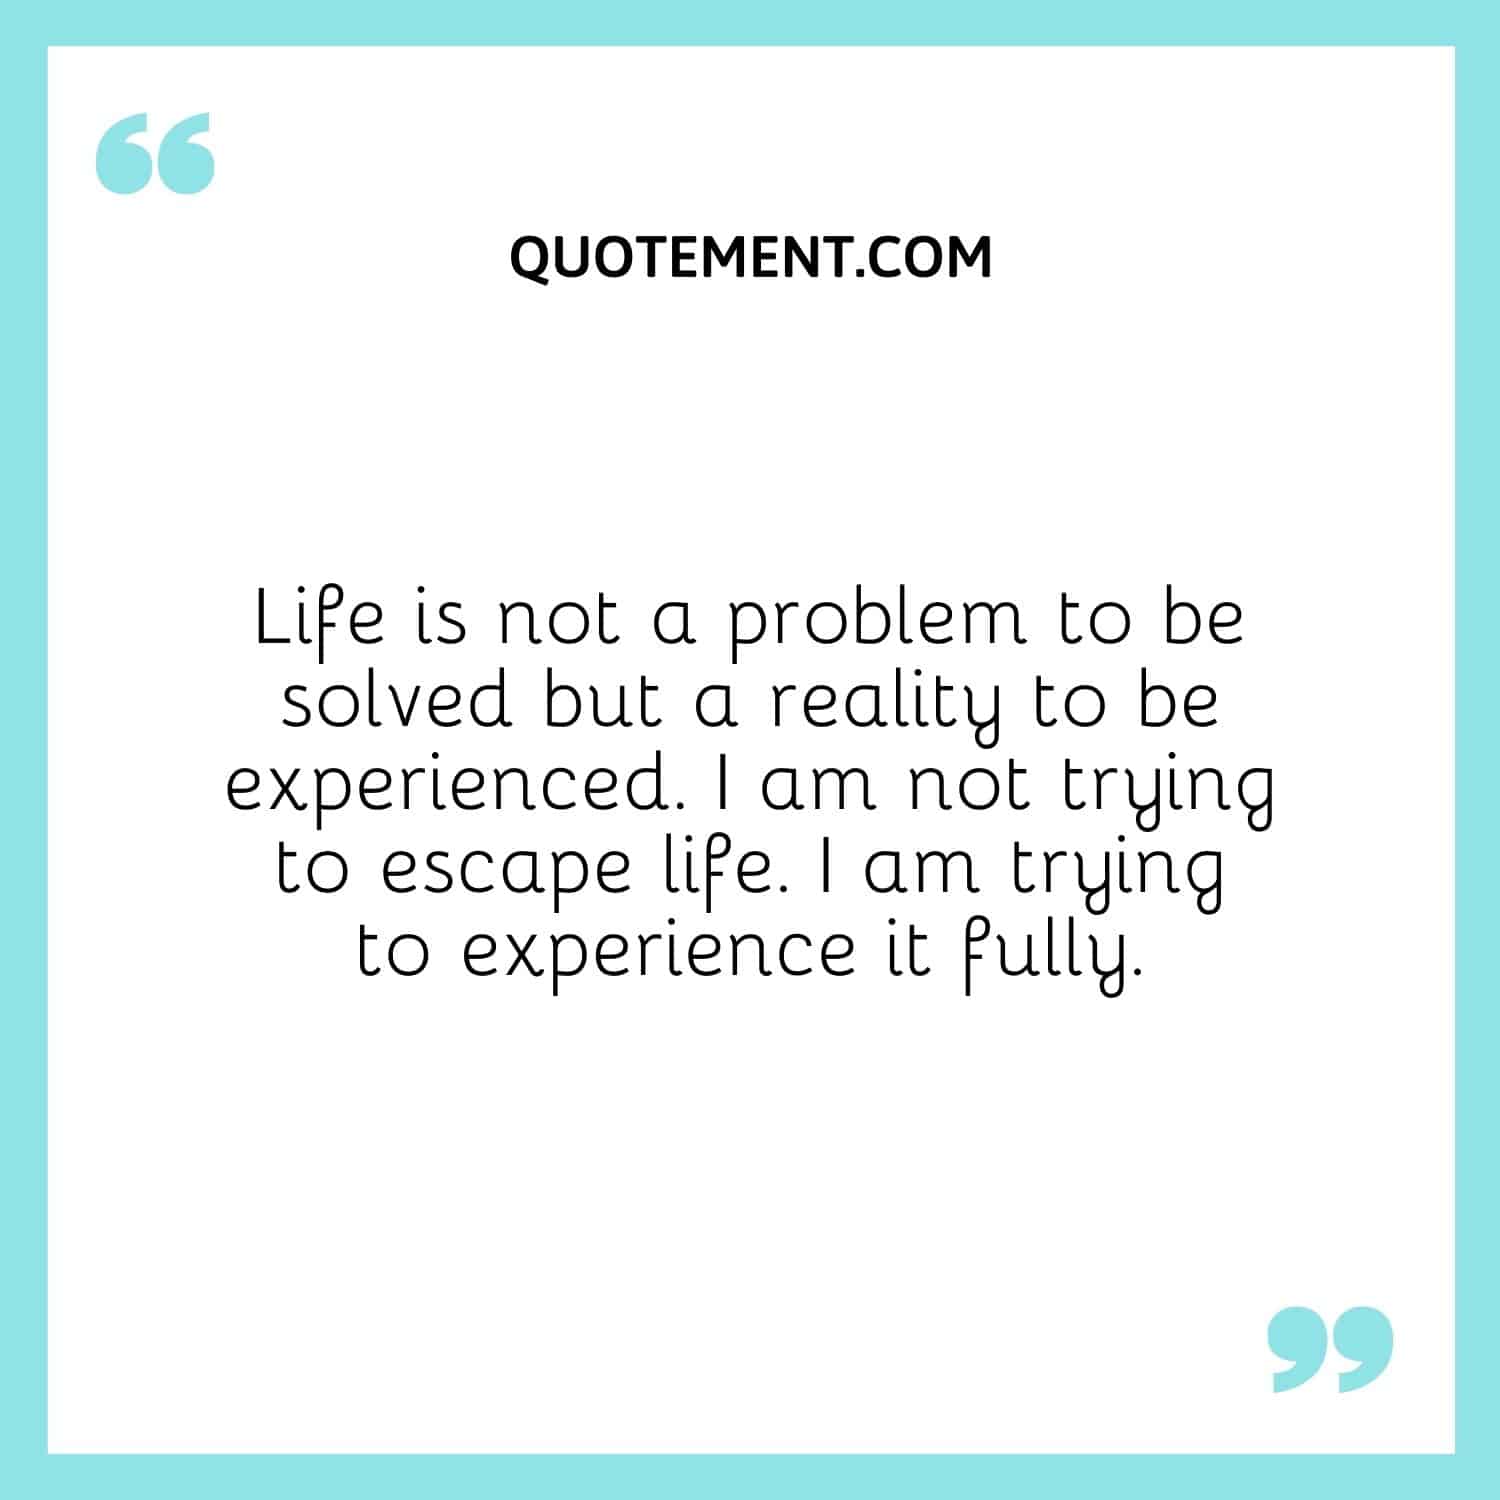 Life is not a problem to be solved but a reality to be experienced. I am not trying to escape life. I am trying to experience it fully.